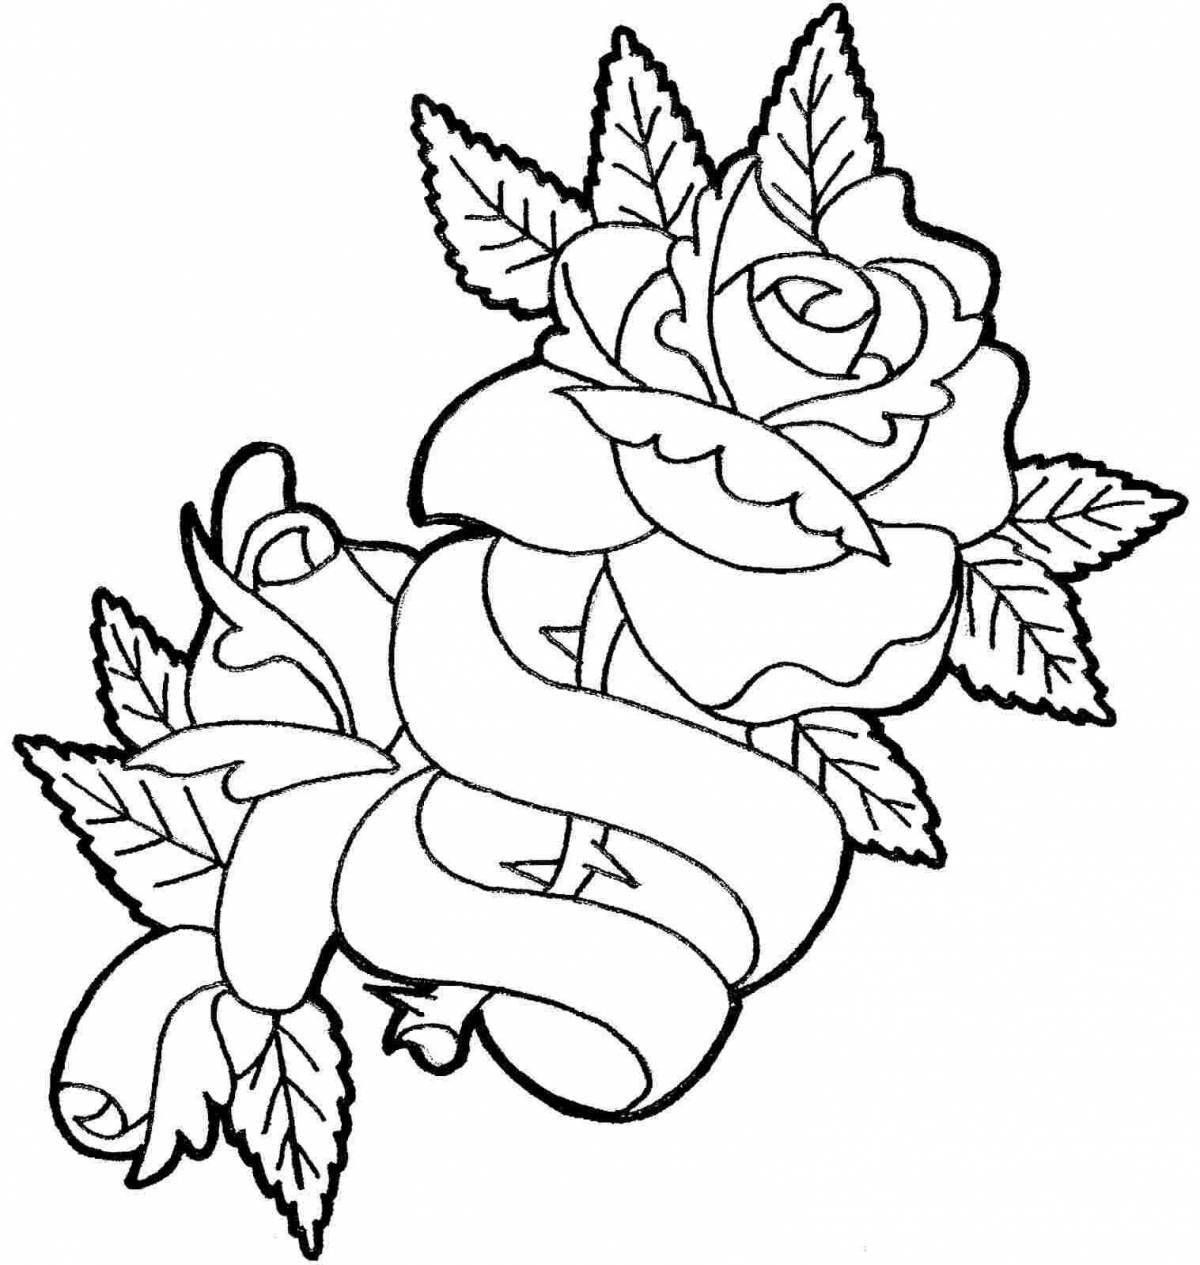 Adorable rose coloring book for kids 5-6 years old